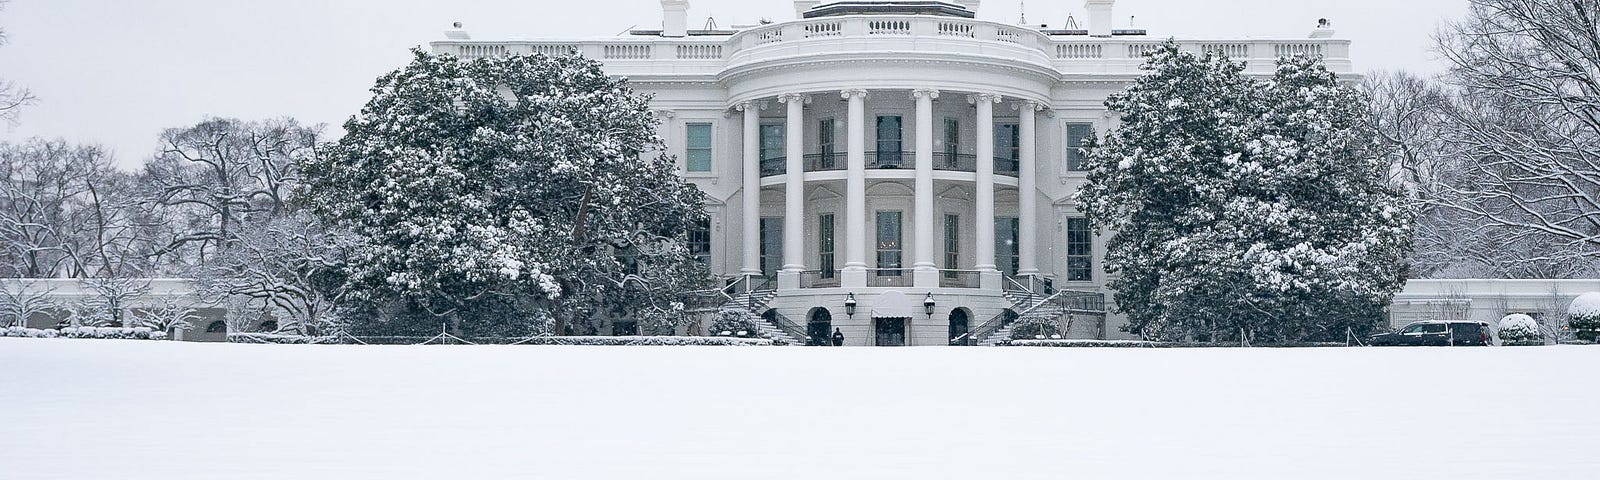 Photo of the White House covered in snow, January 2019